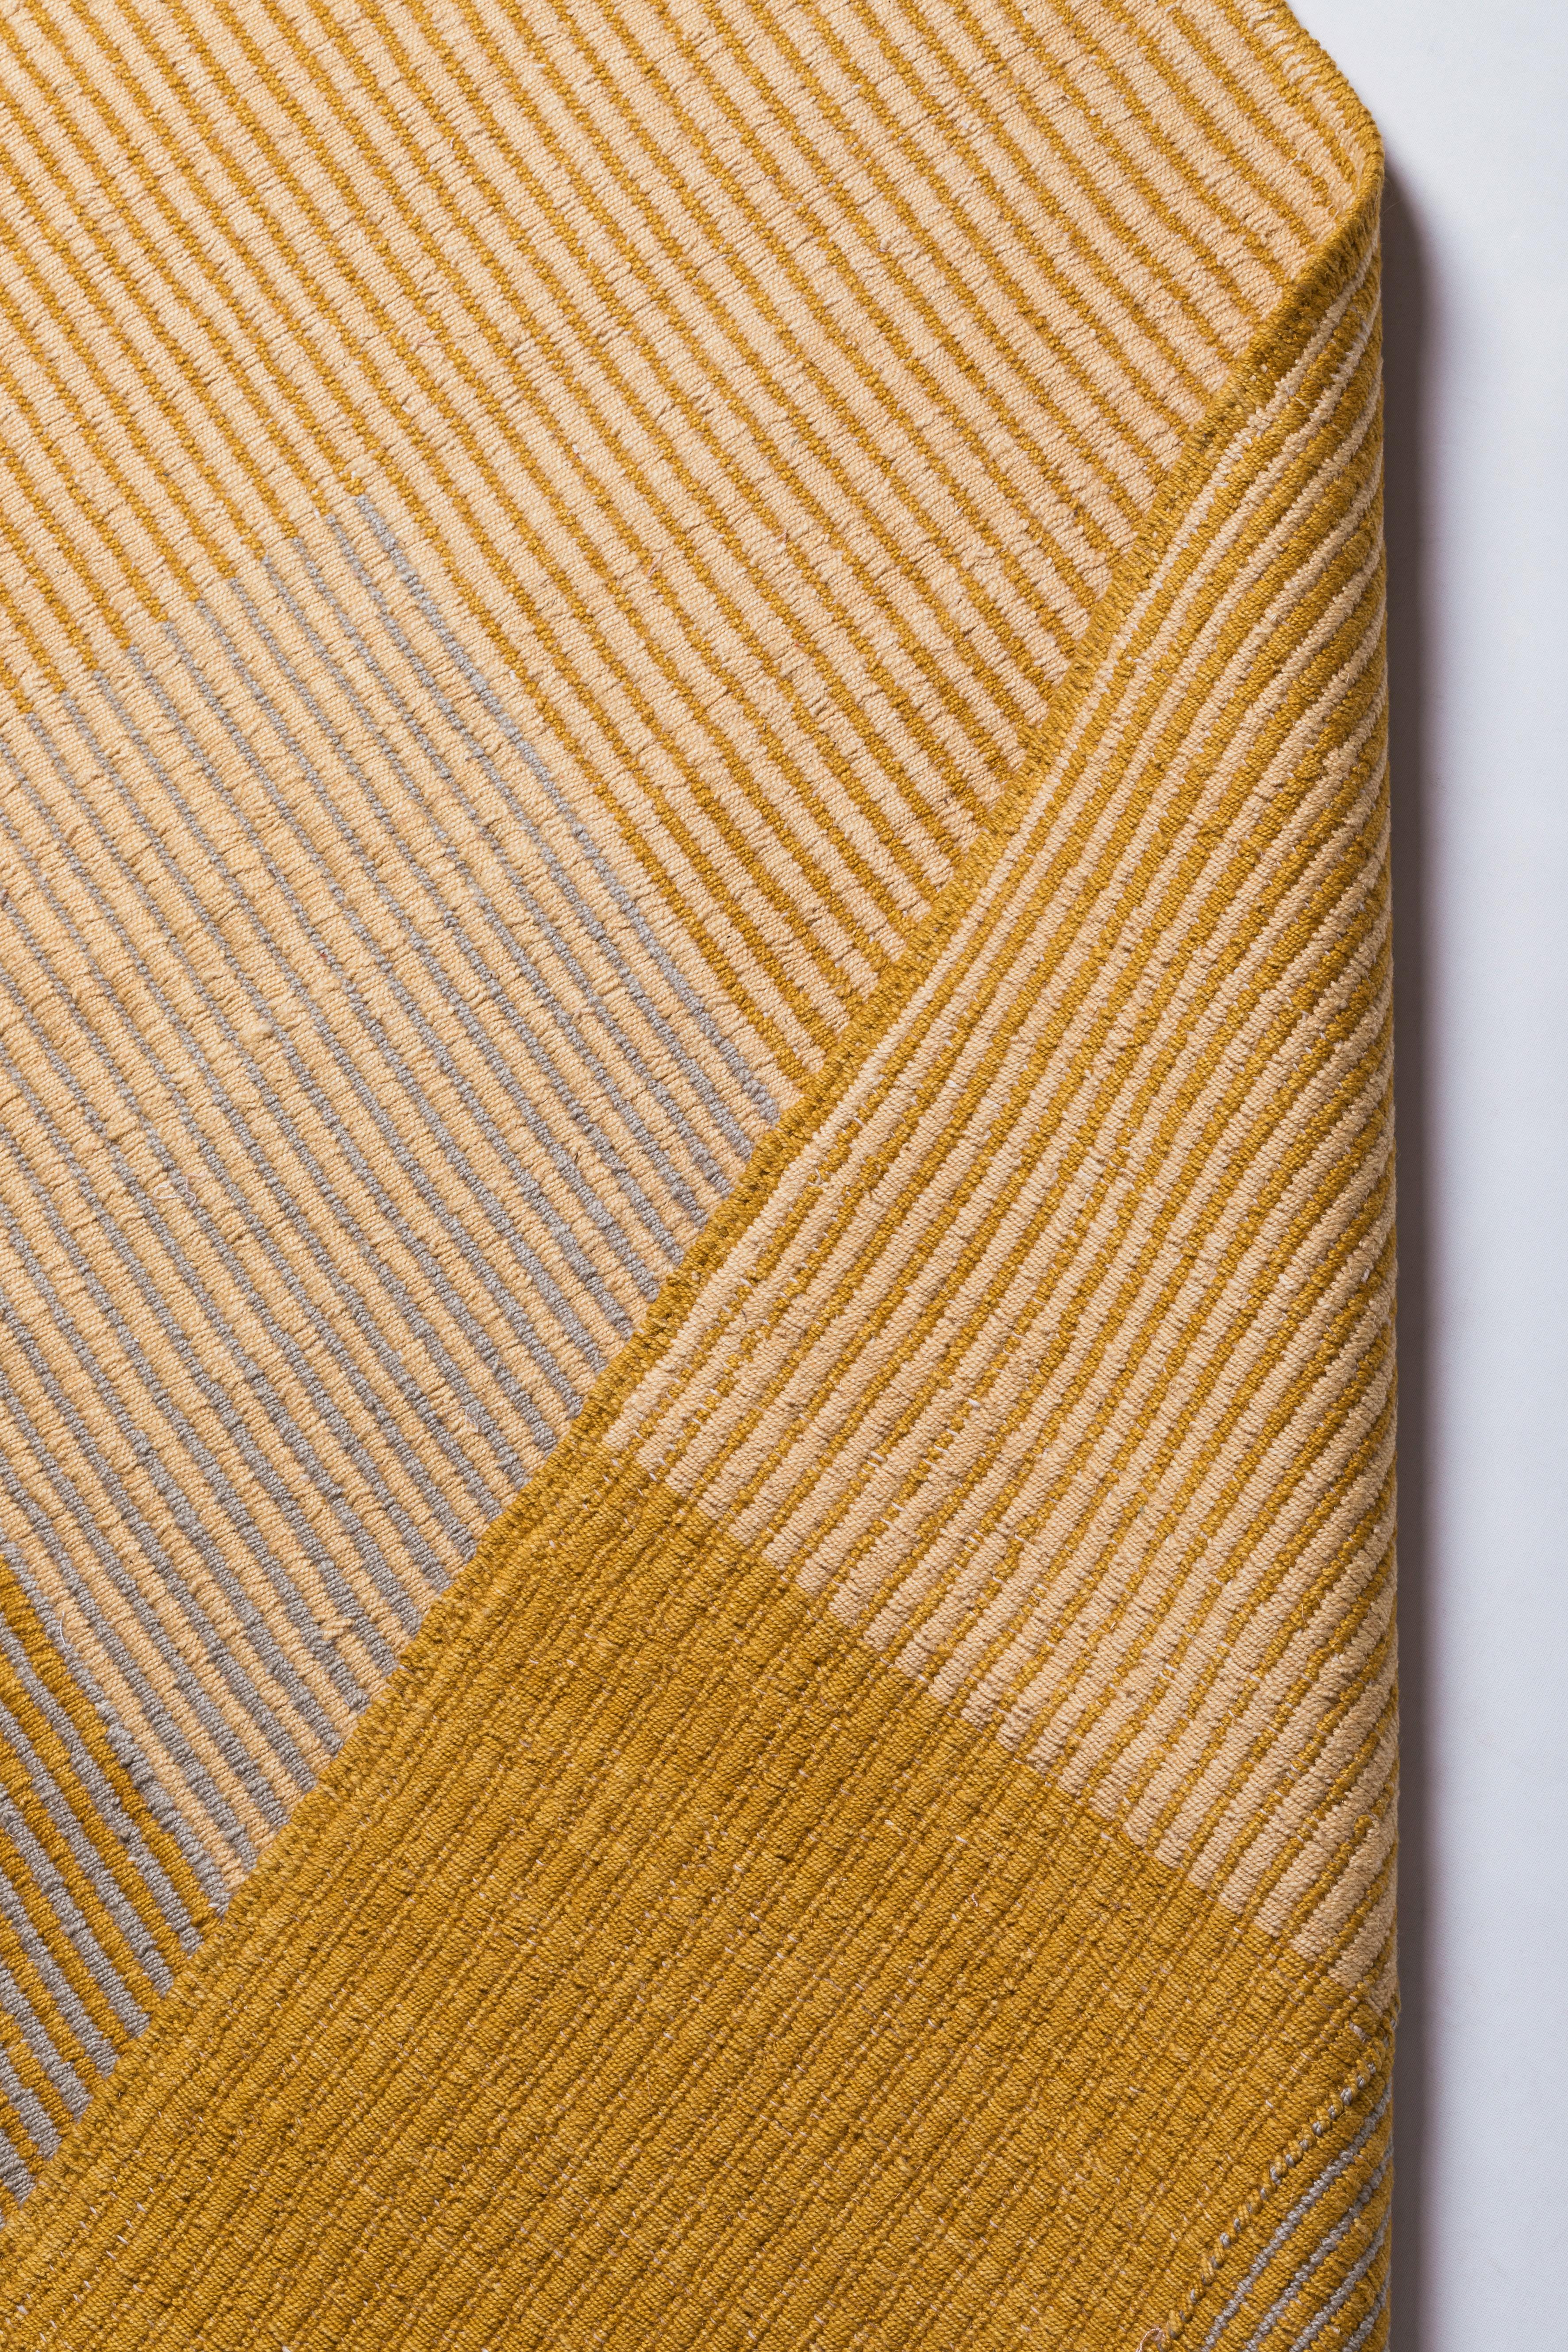 Haze Contemporary Kilim Area Rug Wool Handwoven in Yellow Small in Stock In New Condition In Istanbul, TR